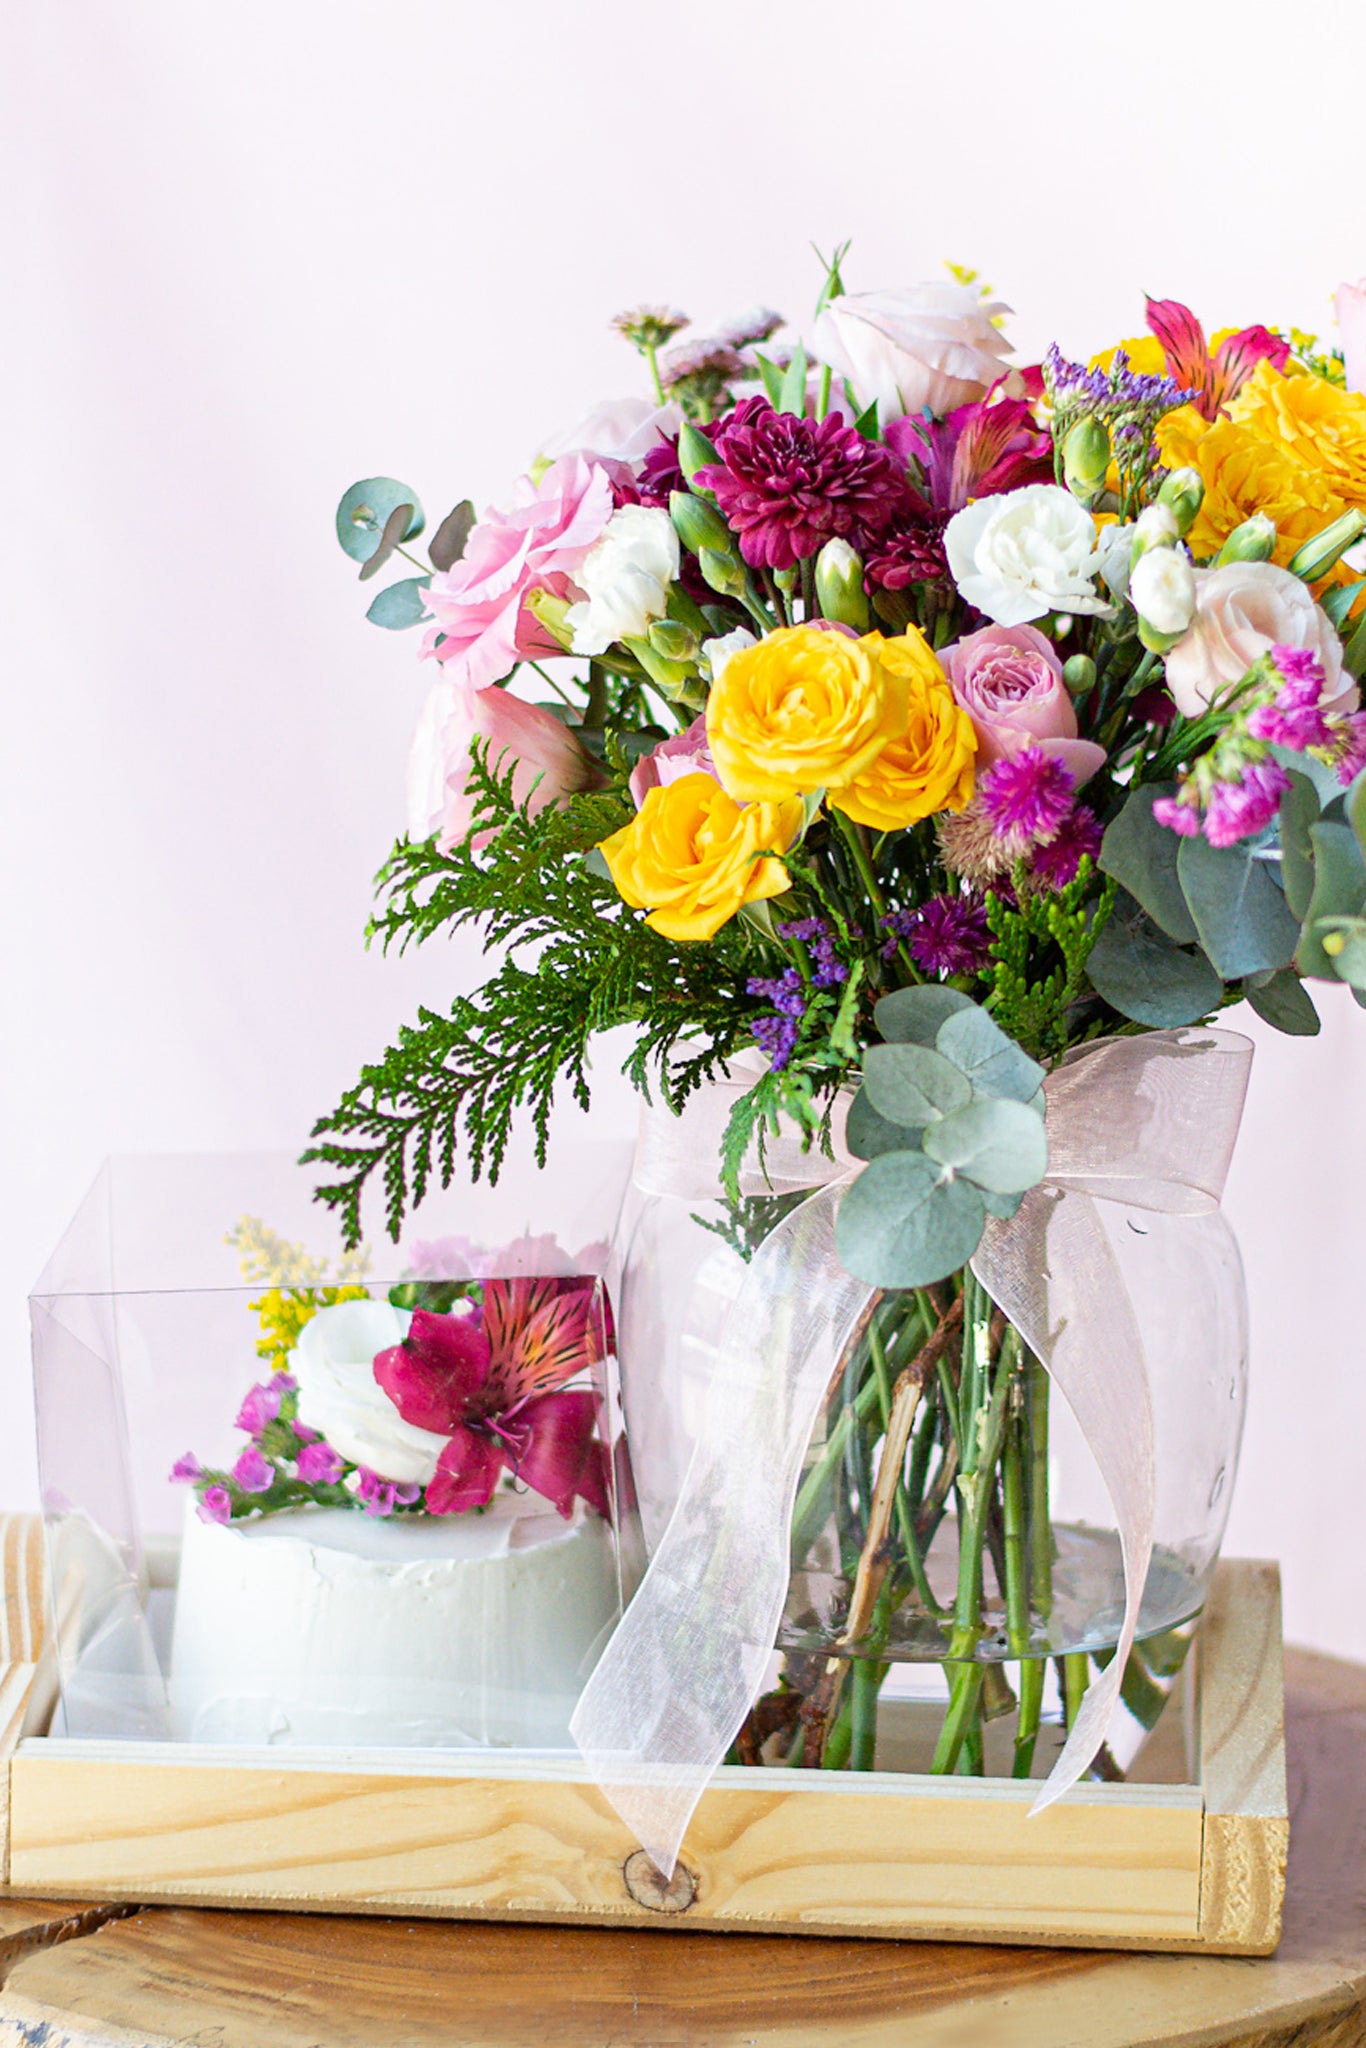 FLOWERS AND CAKE